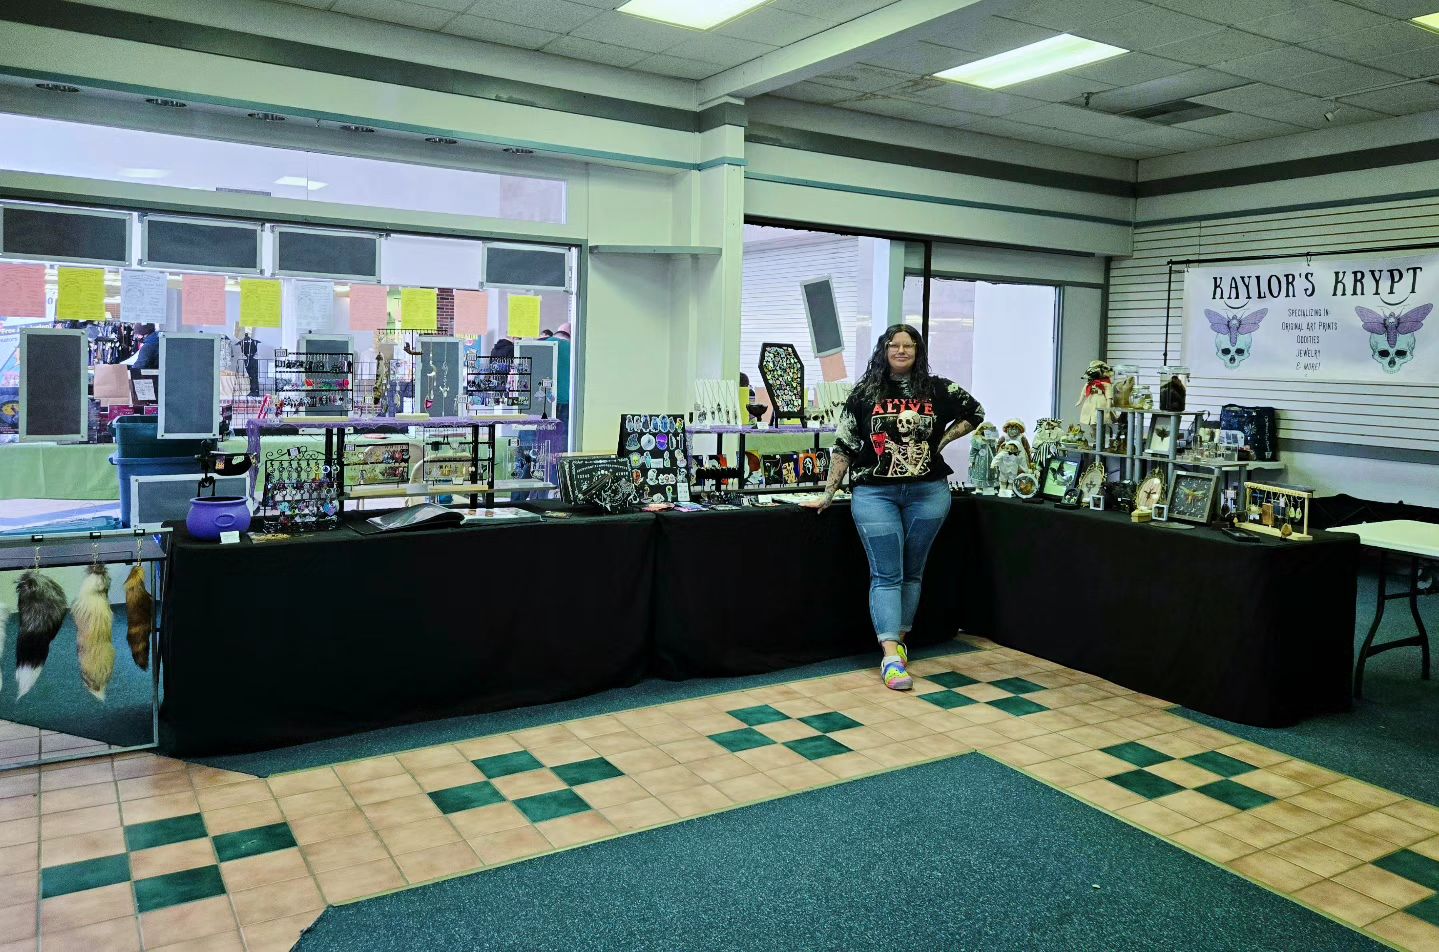 All set up!! 

Today, Sunday, March 24th, is the Everything Entertaining Expo happening in the Arnot Mall in Horseheads Ny from noon to 5pm! This is a completely FREE admission event with live music inside The Squatch Den with small business vendors and artisans nearby! Don’t miss out on this amazing event! 

https://facebook.com/events/s/everything-entertaining-expo/707618104821779/

#shoplocal #shophandmade #shopsmall  #oddities #deadcollector  #renaissancefestival #renaissance #fantasy #cosplay #witchythings #witchyvibes #gothic #fairycore #goblincore #faeriecore #vikingstyle #cottagecore #viking #etsysgonegothic #upstatenyartist #broome #broomecounty #arnotmall #artisanmarket #popculture #odditiesandcuriosities